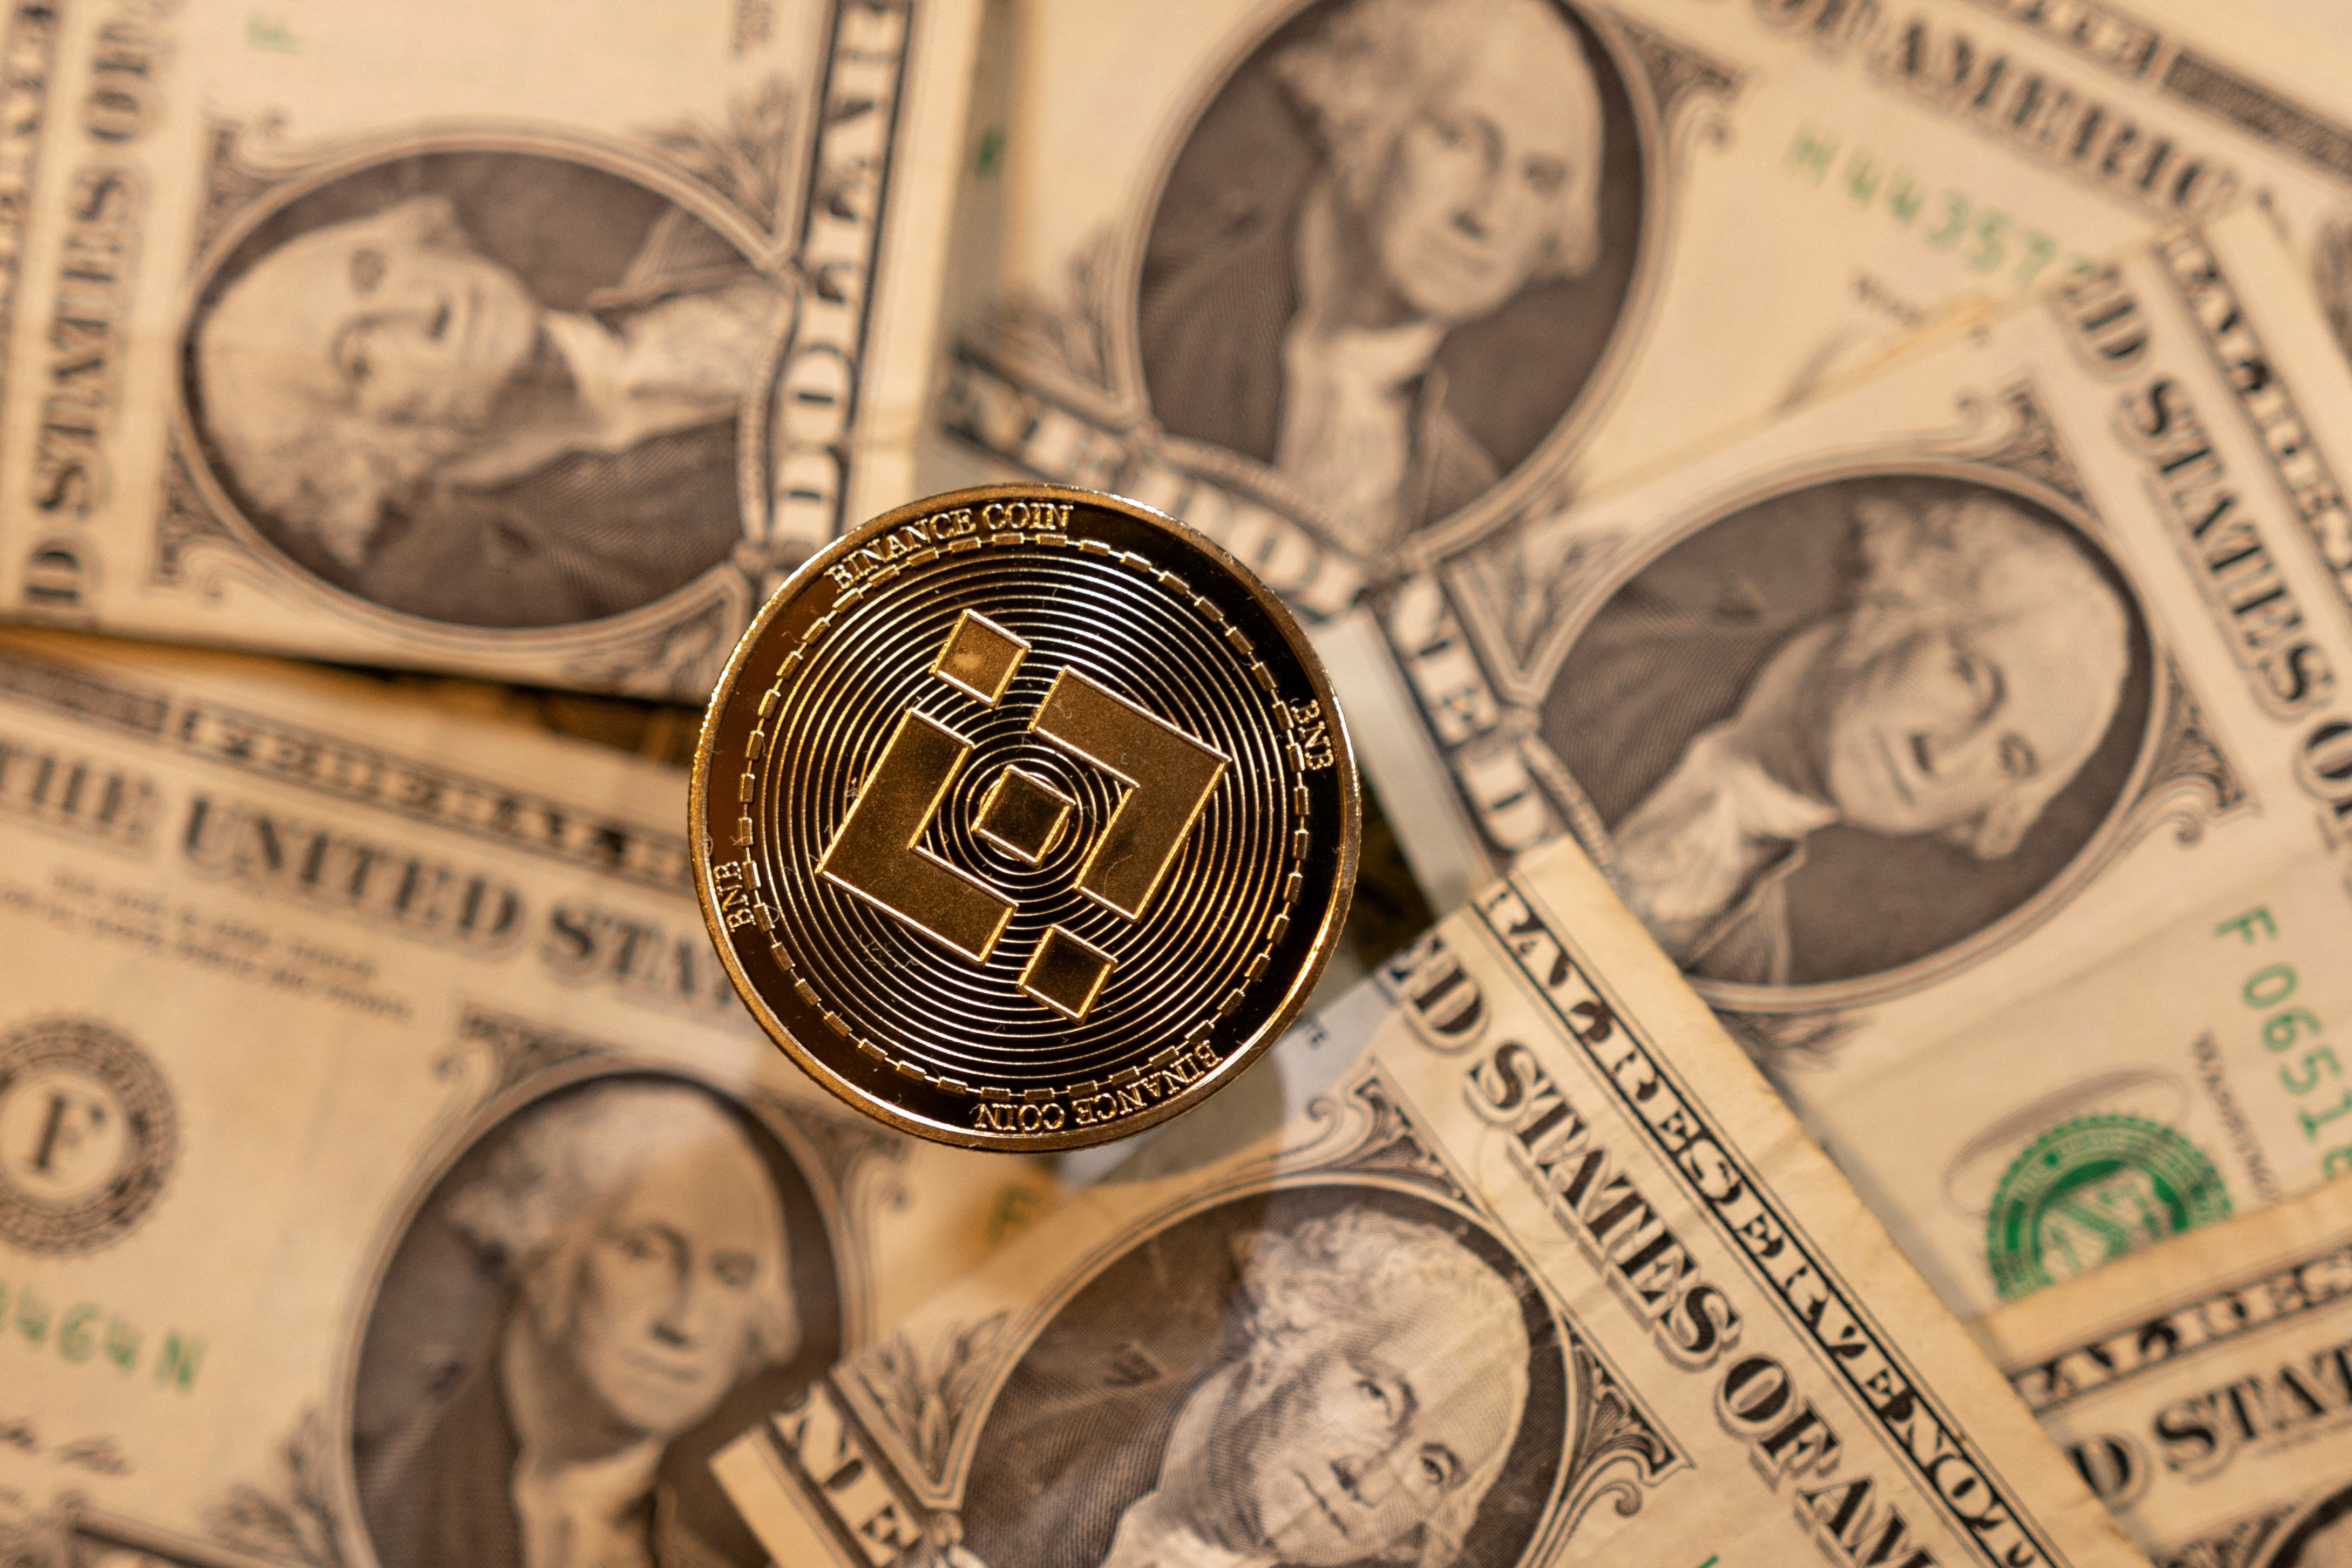 Illustration shows coin representation of cryptocurrency exchange Binance and U.S. dollar banknotes